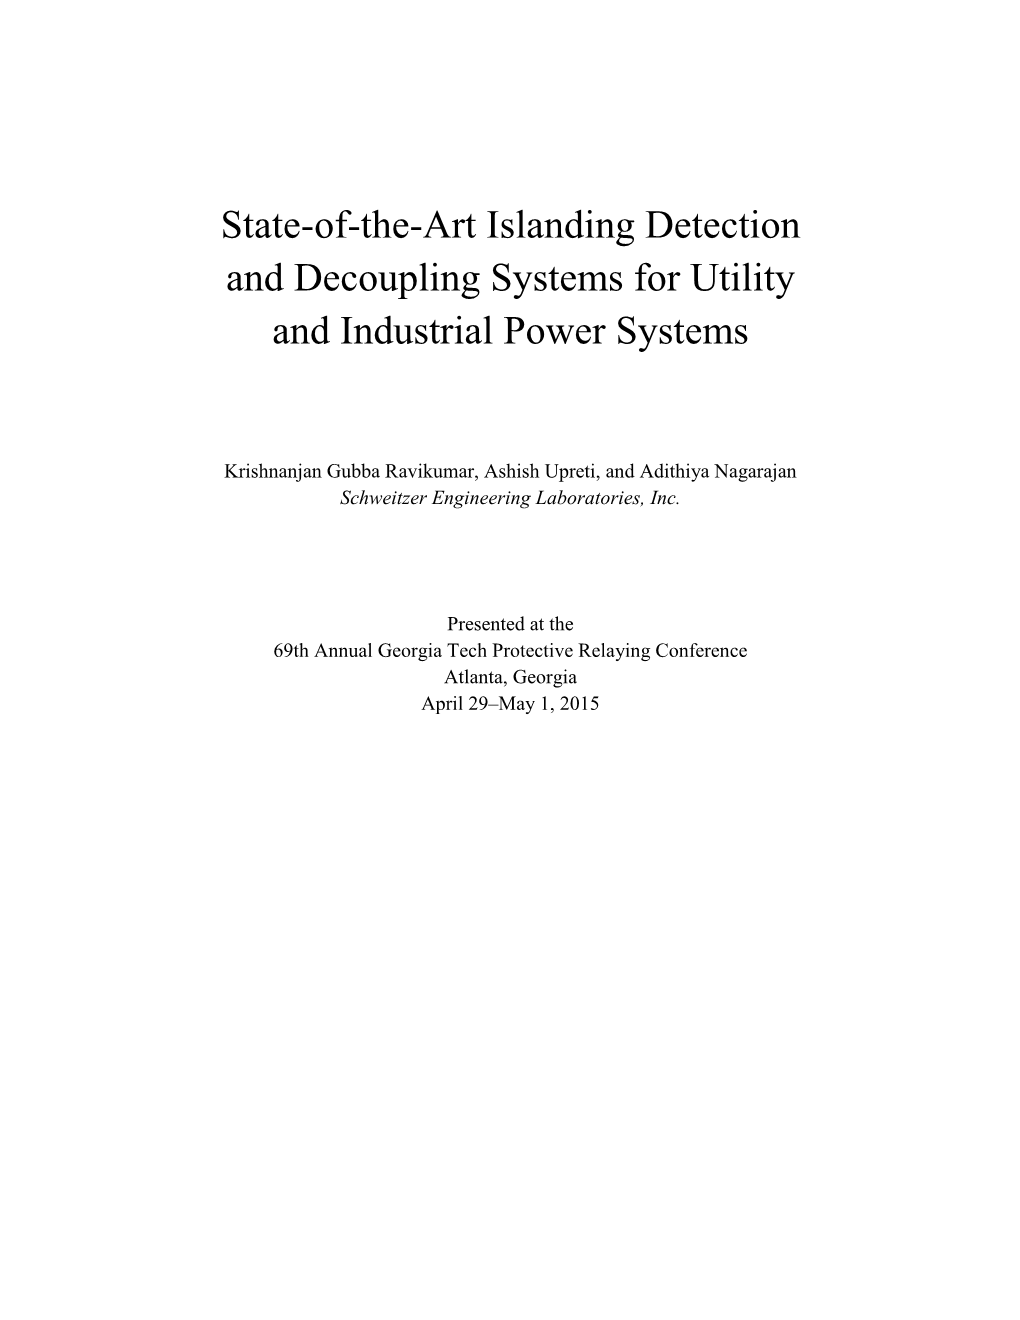 State-Of-The-Art Islanding Detection and Decoupling Systems for Utility and Industrial Power Systems